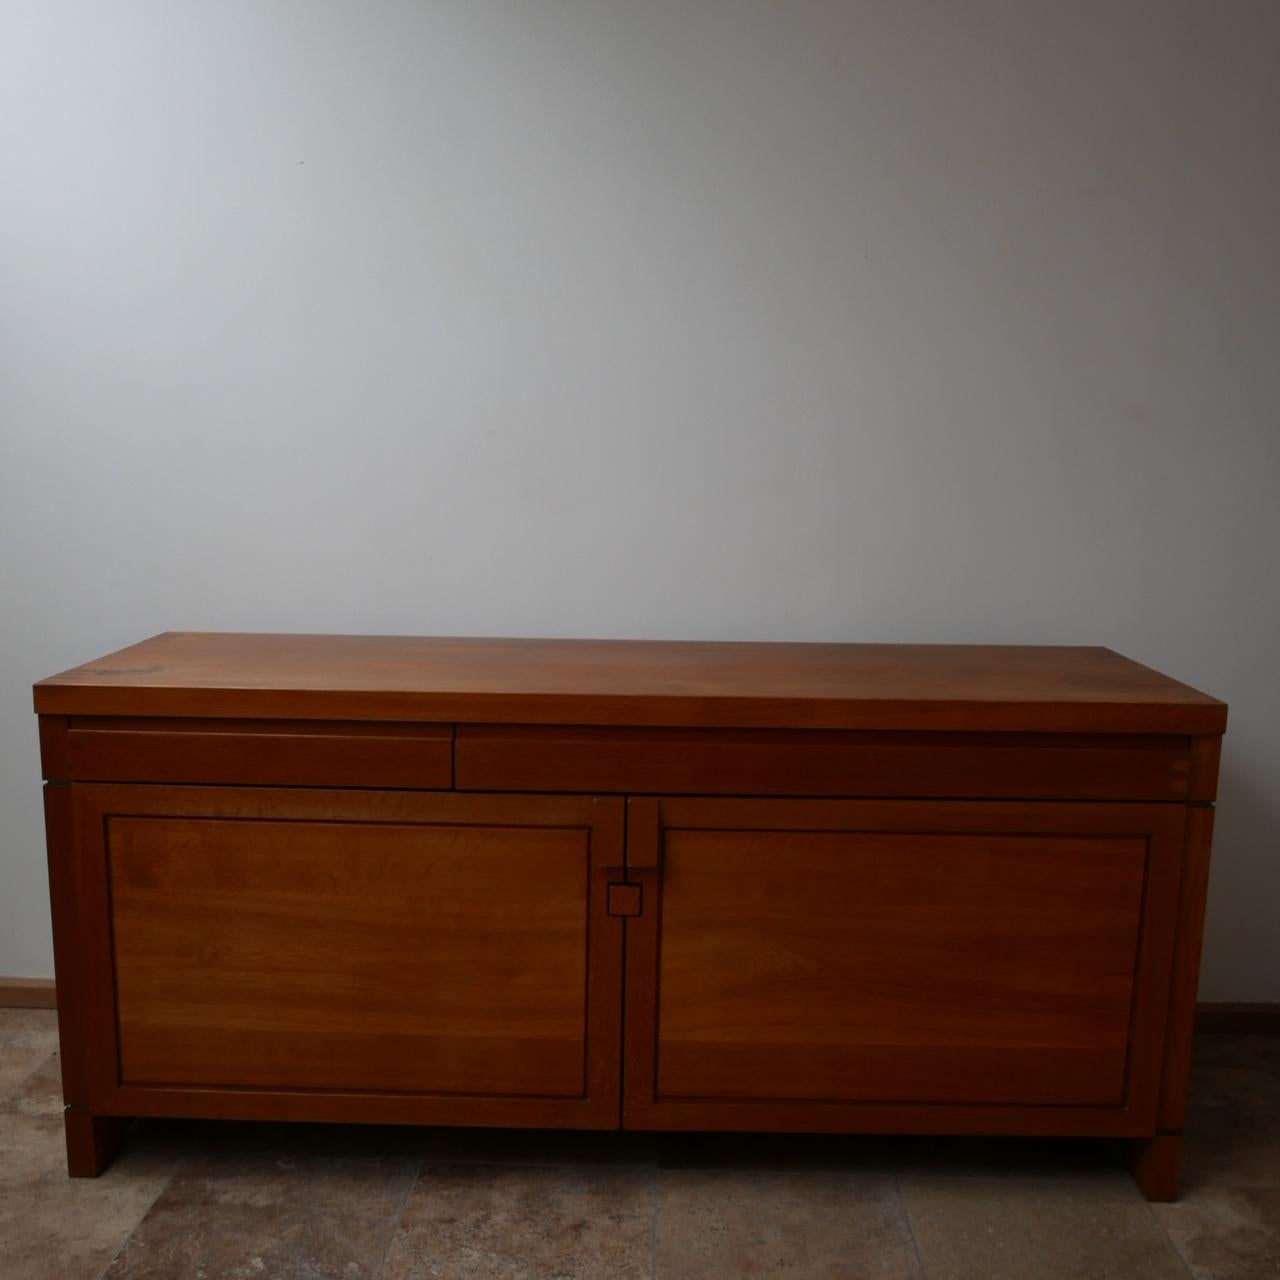 A sideboard by legendary French designer, Pierre Chapo.

Immense quality of materials and construction.

Normally formed from elm, this one is an earlier oak model.

Two drawers, two doors.

Dimensions: 52.5 depth x 84 height x 182.5 width